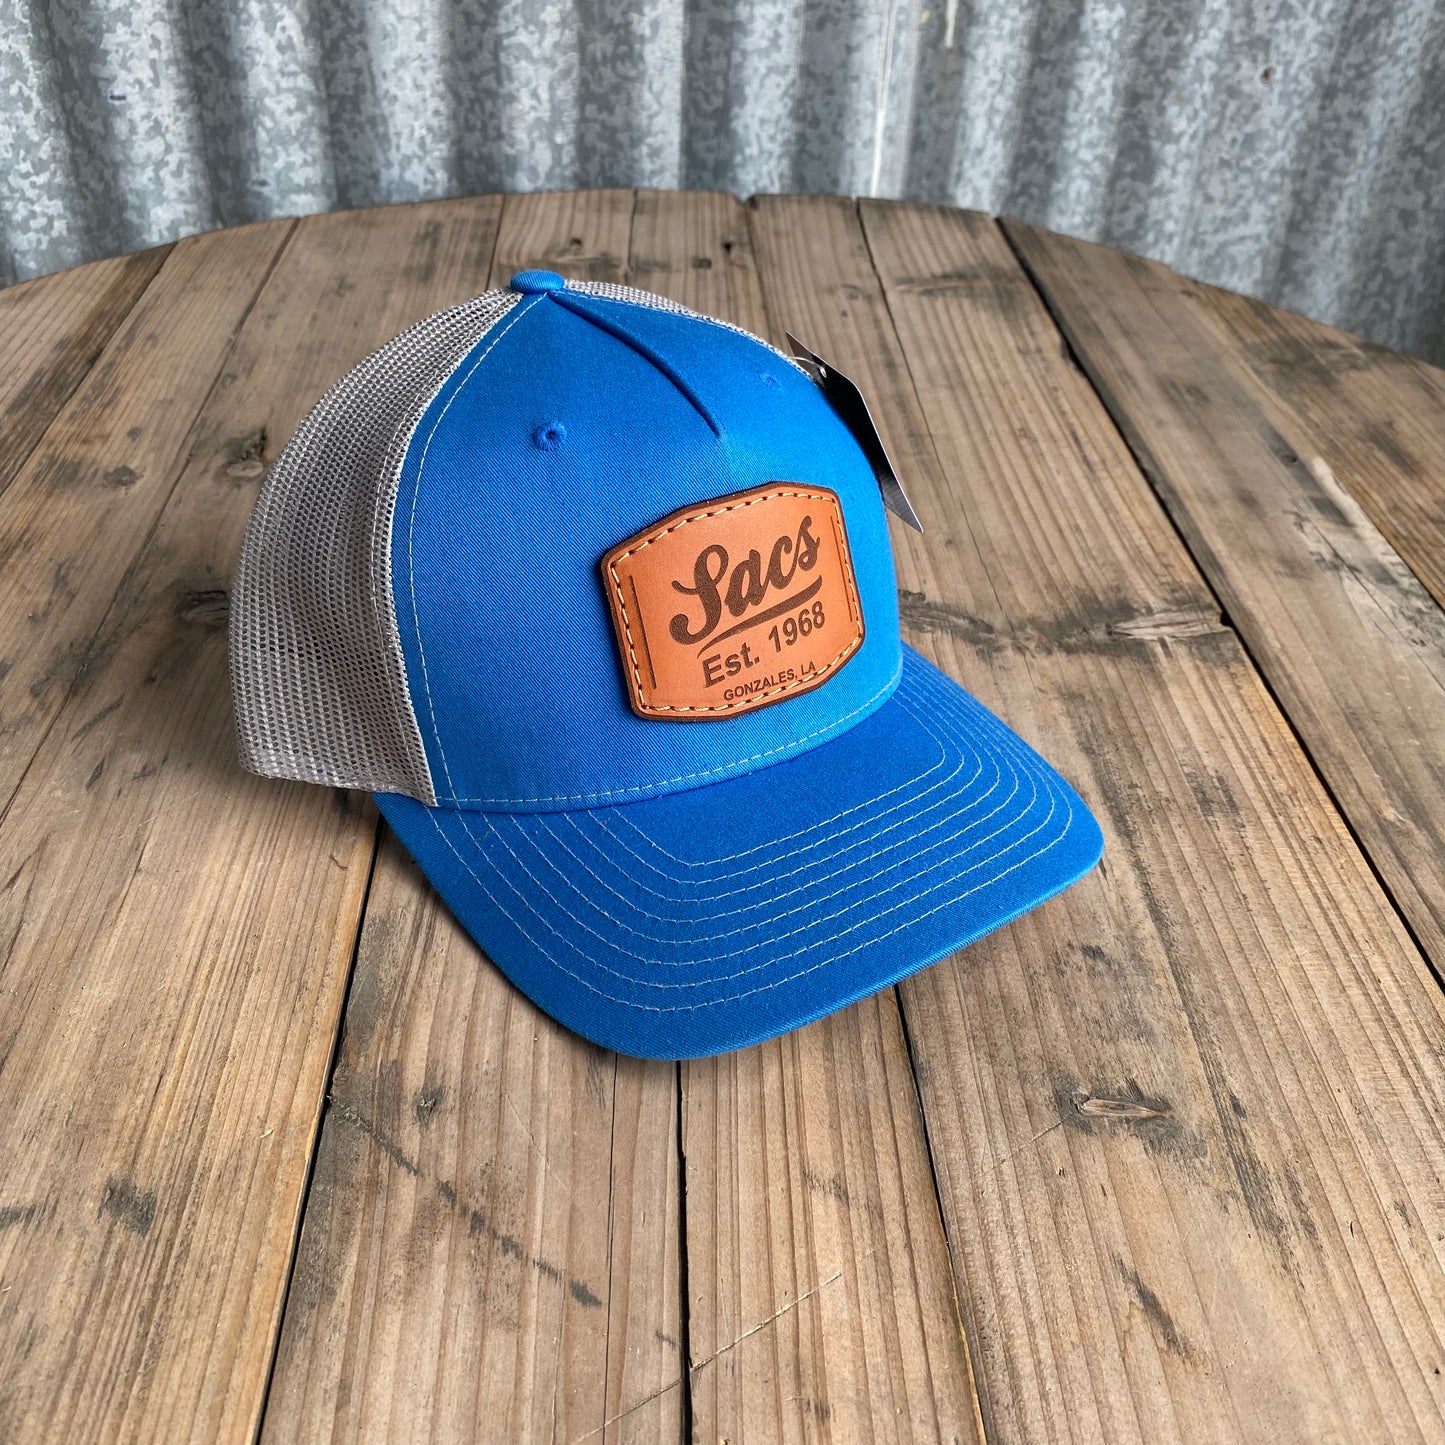 SACS LEATHER PATCH CAP IN BLUE